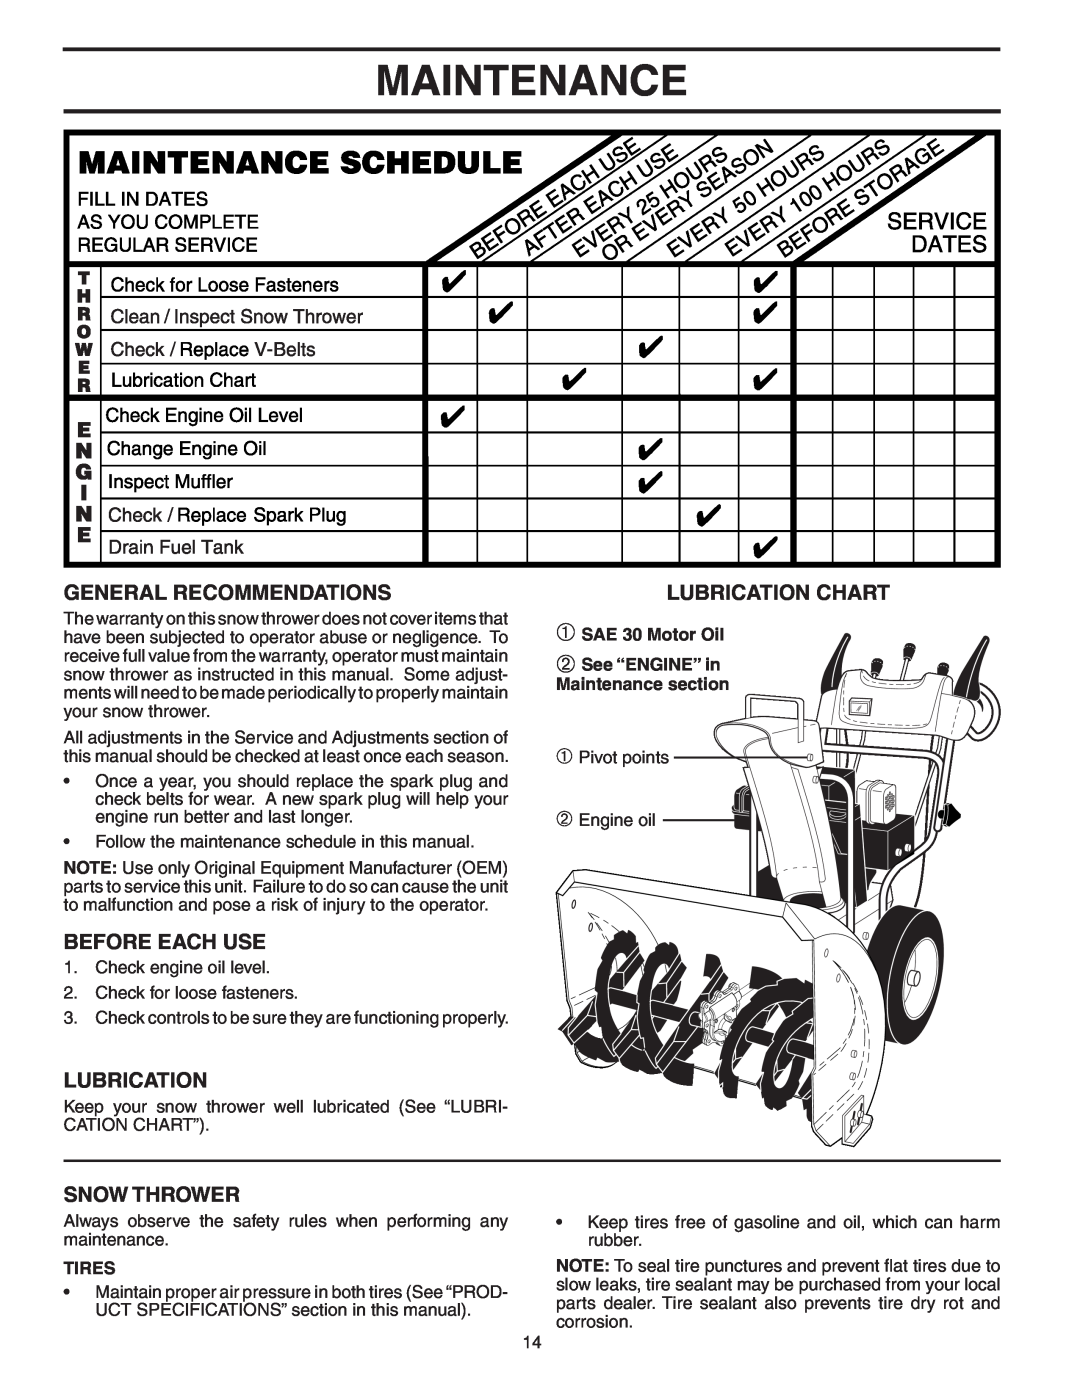 Poulan 183615 Maintenance, General Recommendations, Before Each Use, Snow Thrower, Lubrication Chart, Tires 